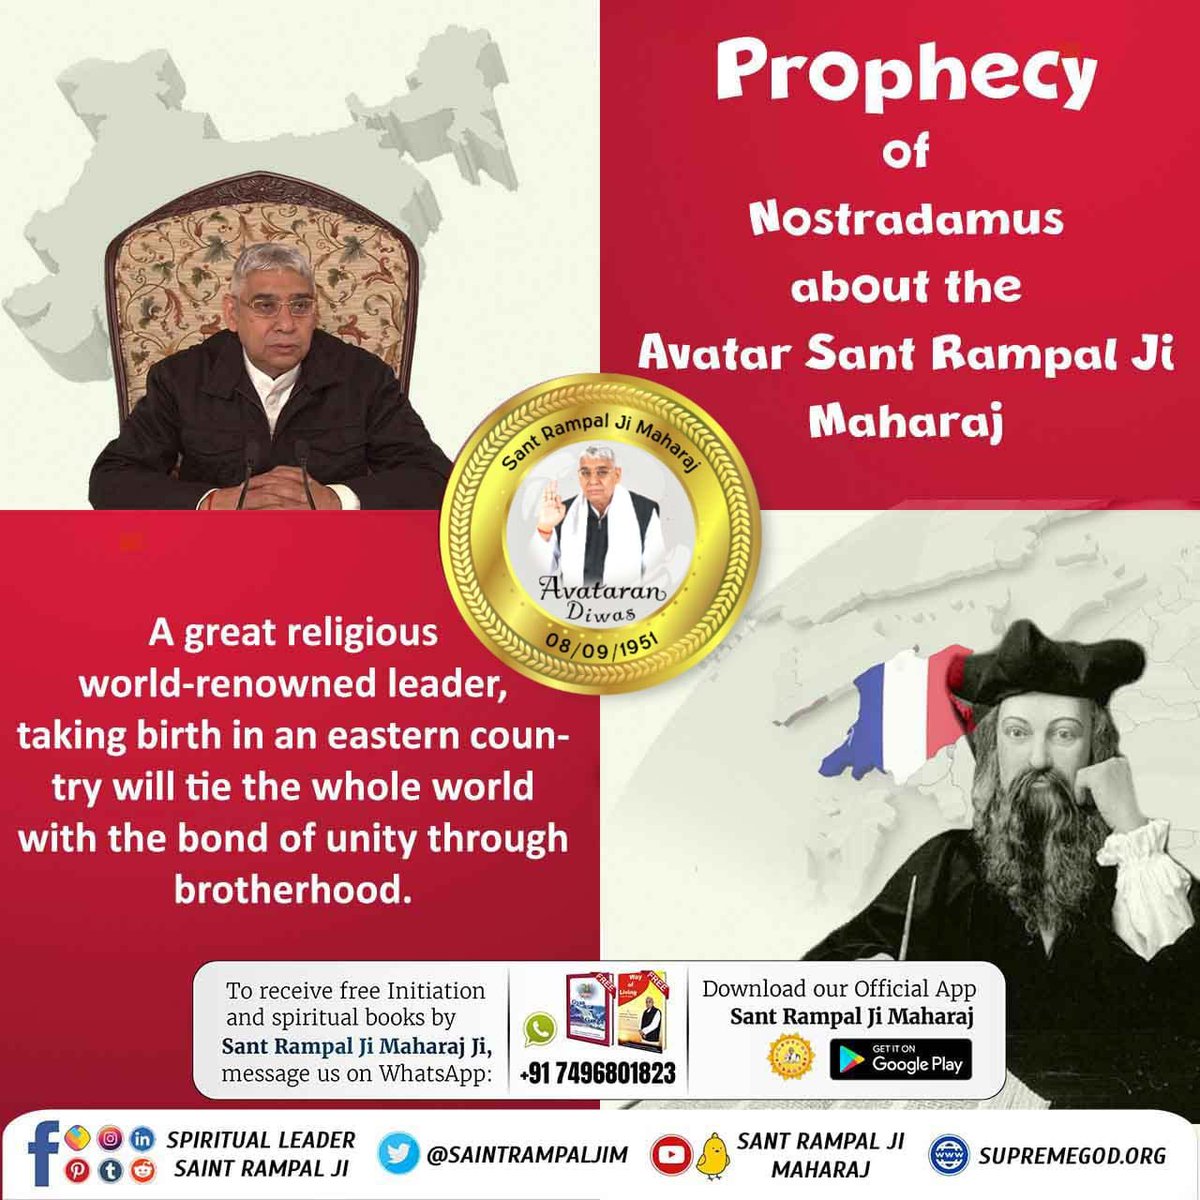 #2DaysLeft_For_AvataranDiwas
Saint Rampal Ji received Naam Updesh on 17th February, 1988 on the new moon night of Phalgun month. Preaching Day in Santmat | The preacher is considered to be the spiritual birthday of the devotee.
পৃথিৱীত অৱতাৰ